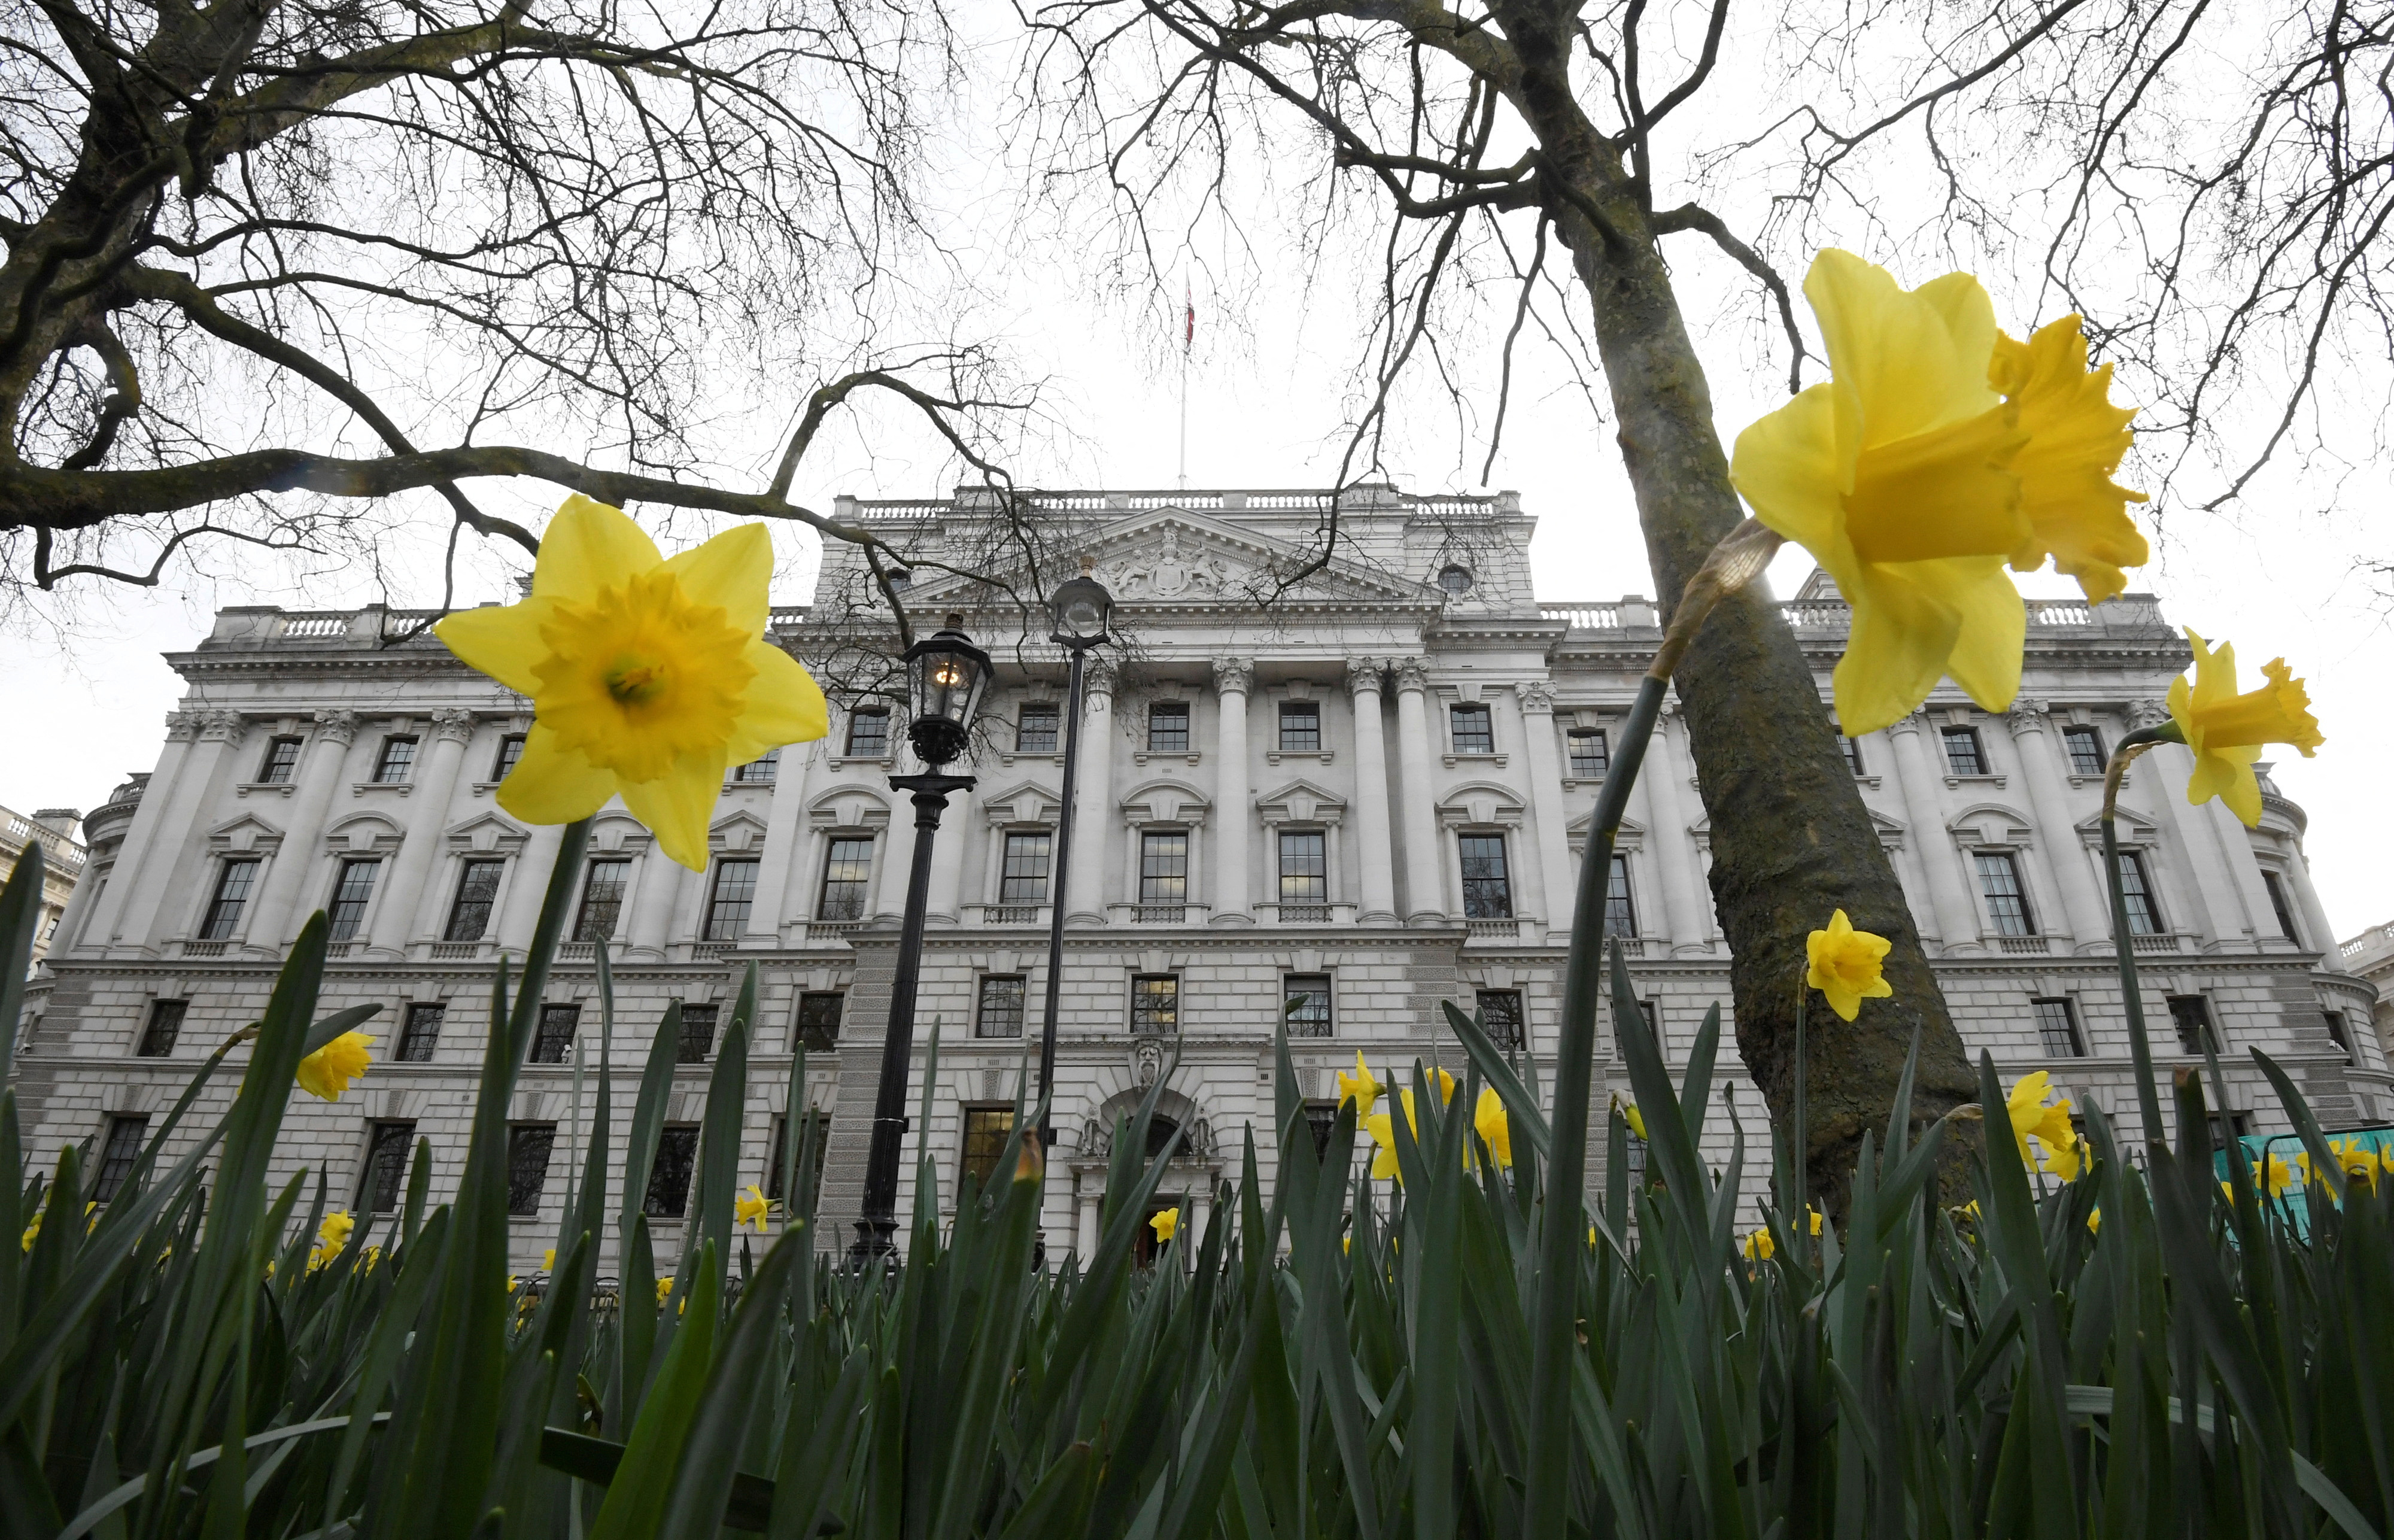 Daffodils are seen flowering near the Treasury building in London, Britain